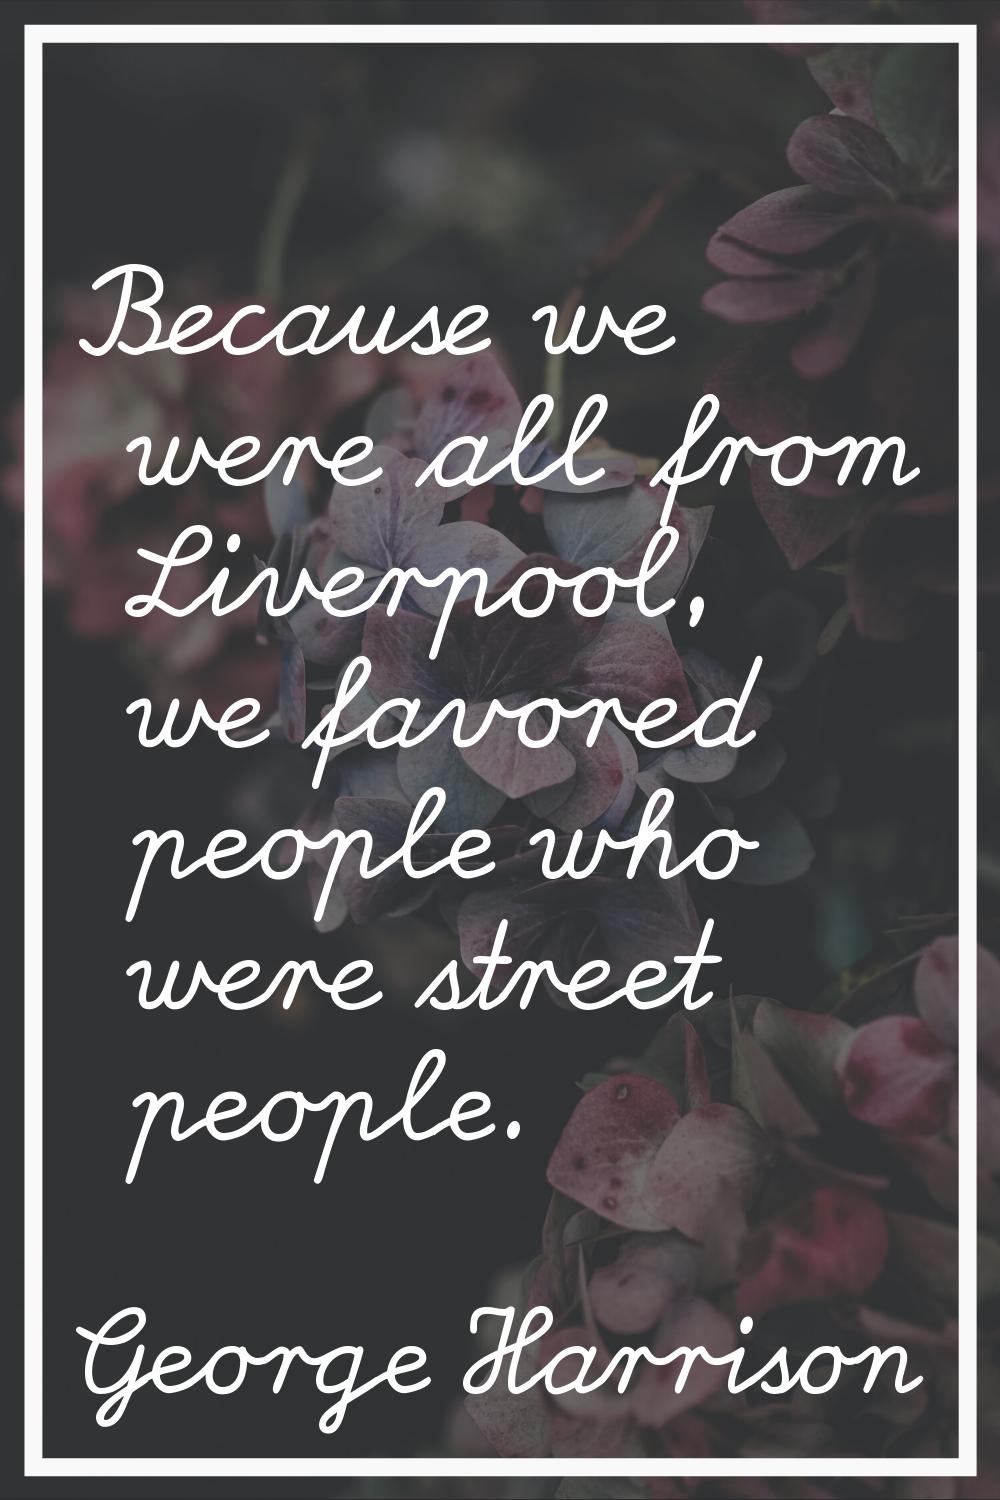 Because we were all from Liverpool, we favored people who were street people.